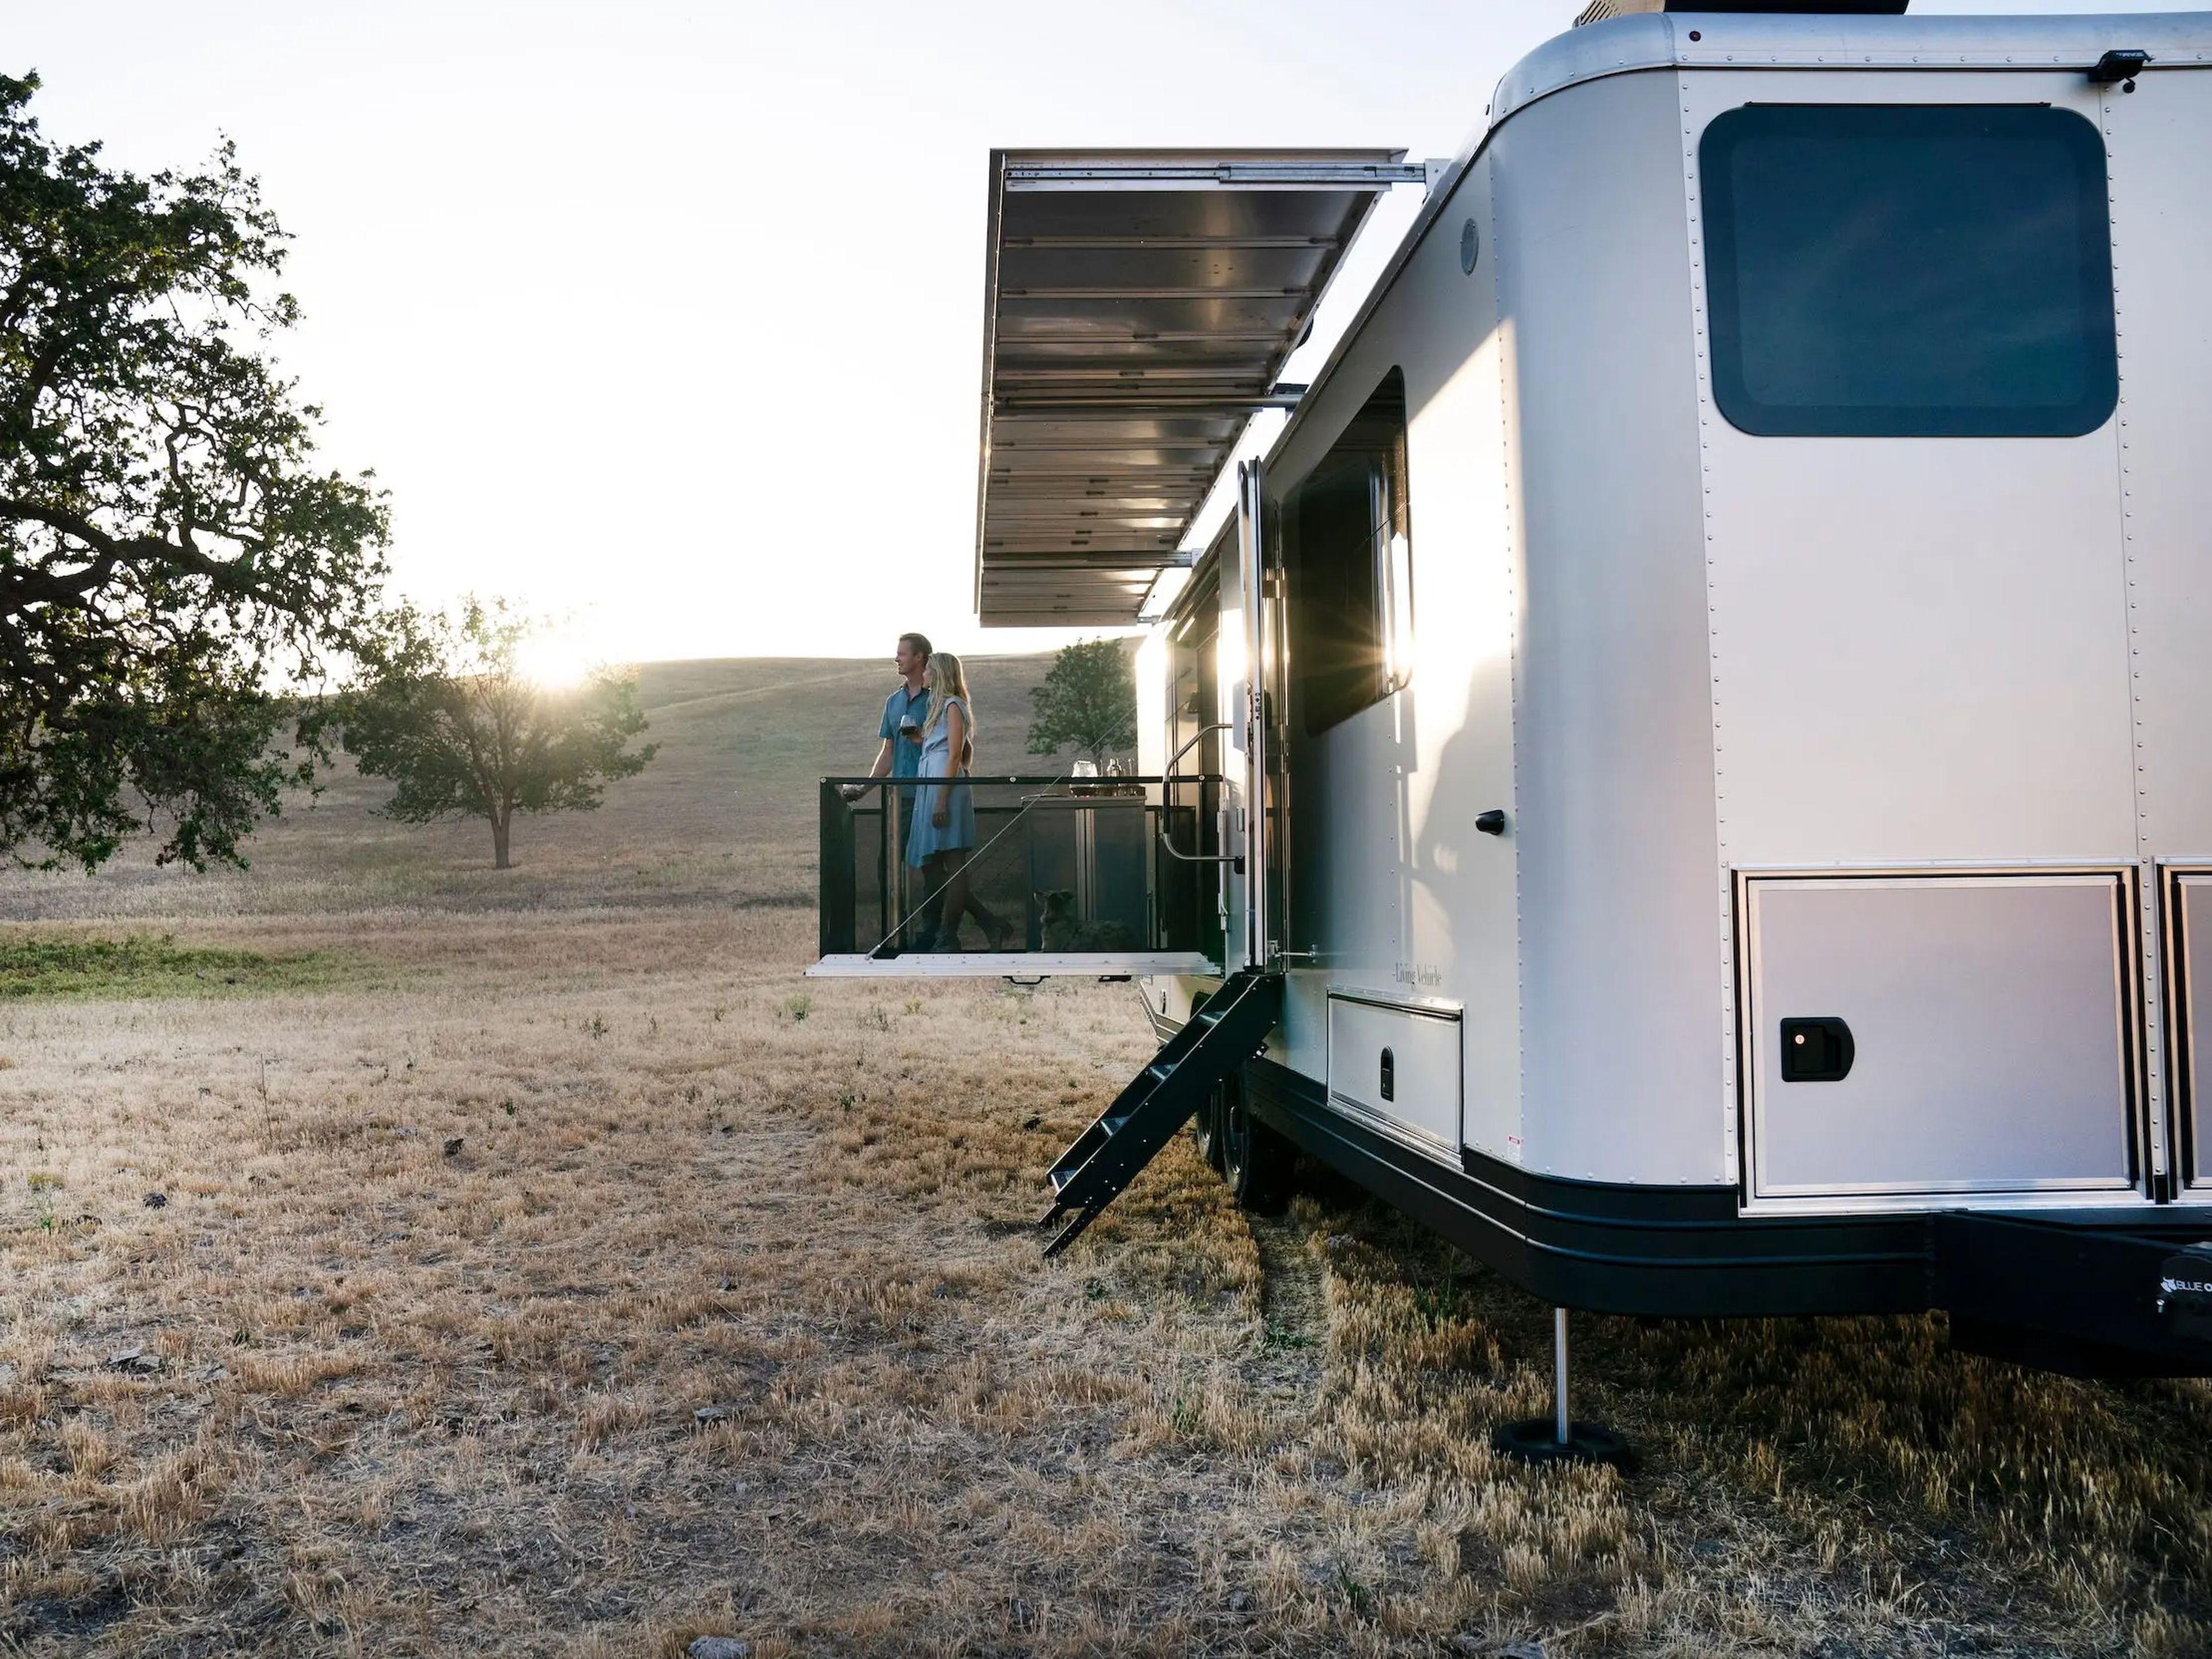 The exterior of the travel trailer as it sits on a brown field. The patio is extended and people are standing on it.